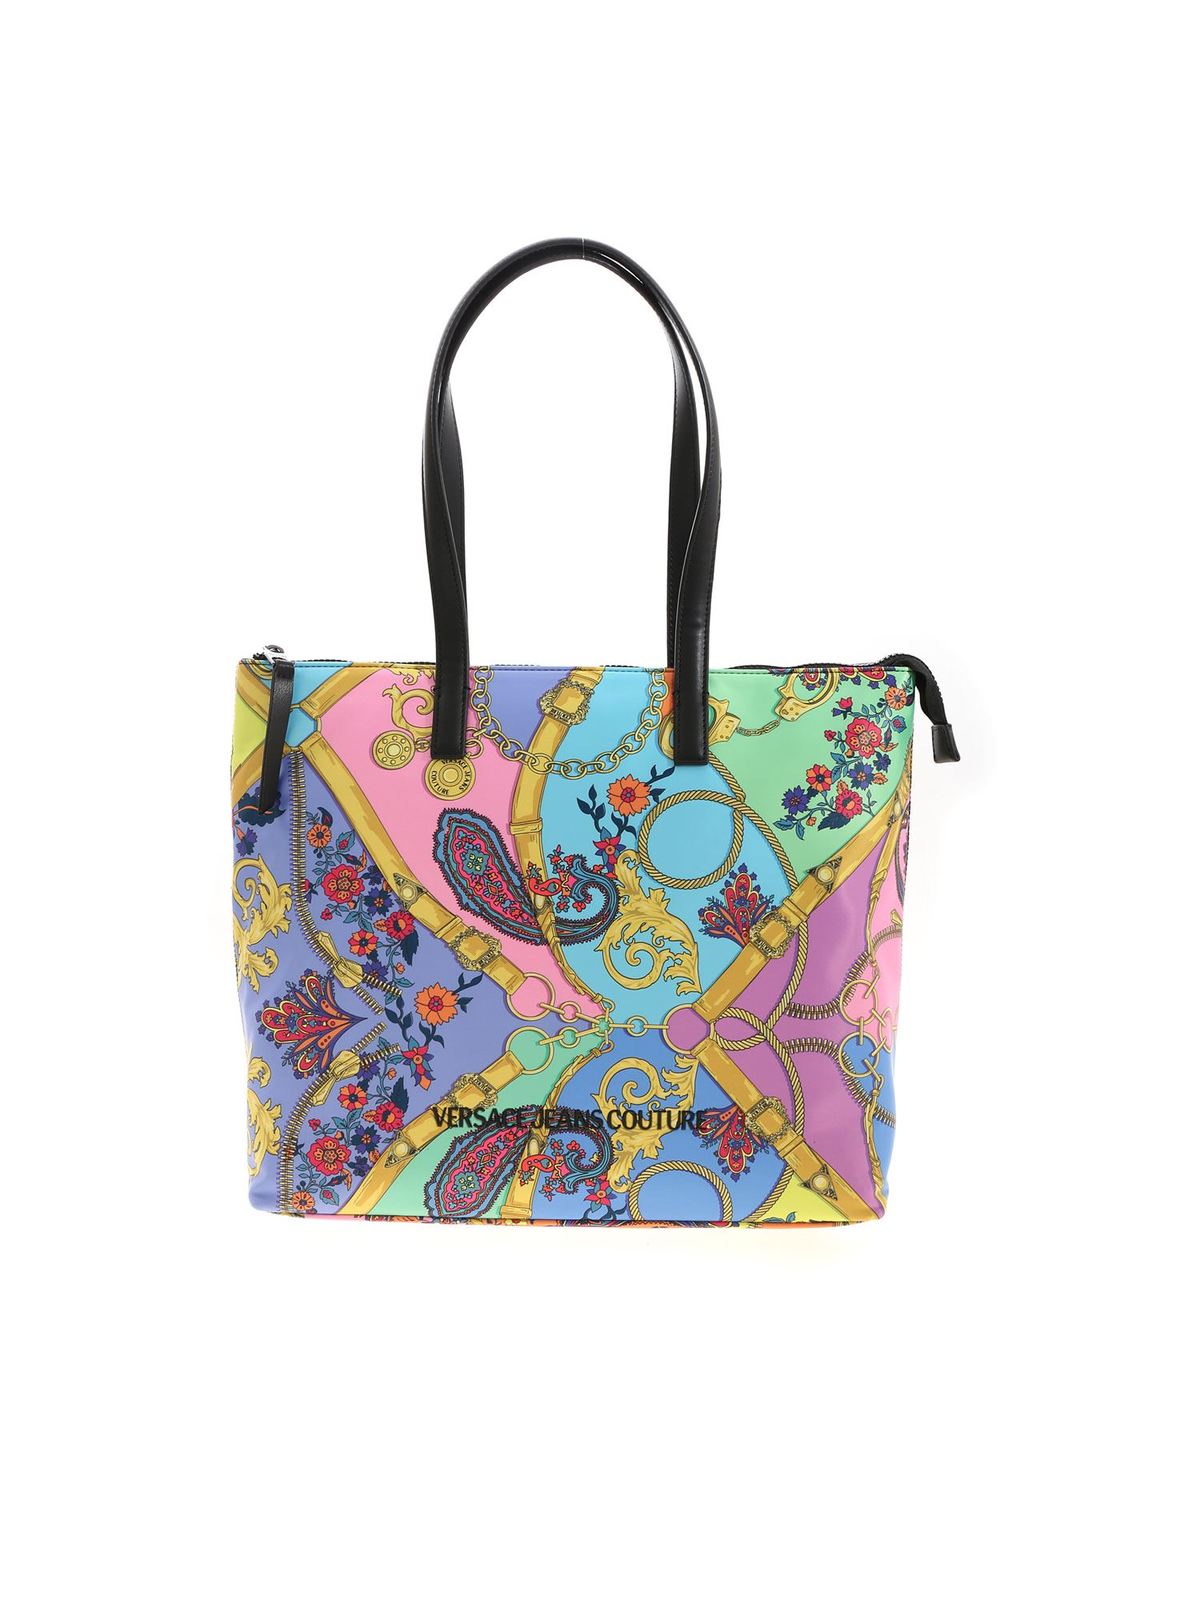 VERSACE JEANS COUTURE MULTICOLORED SHOPPING BAG